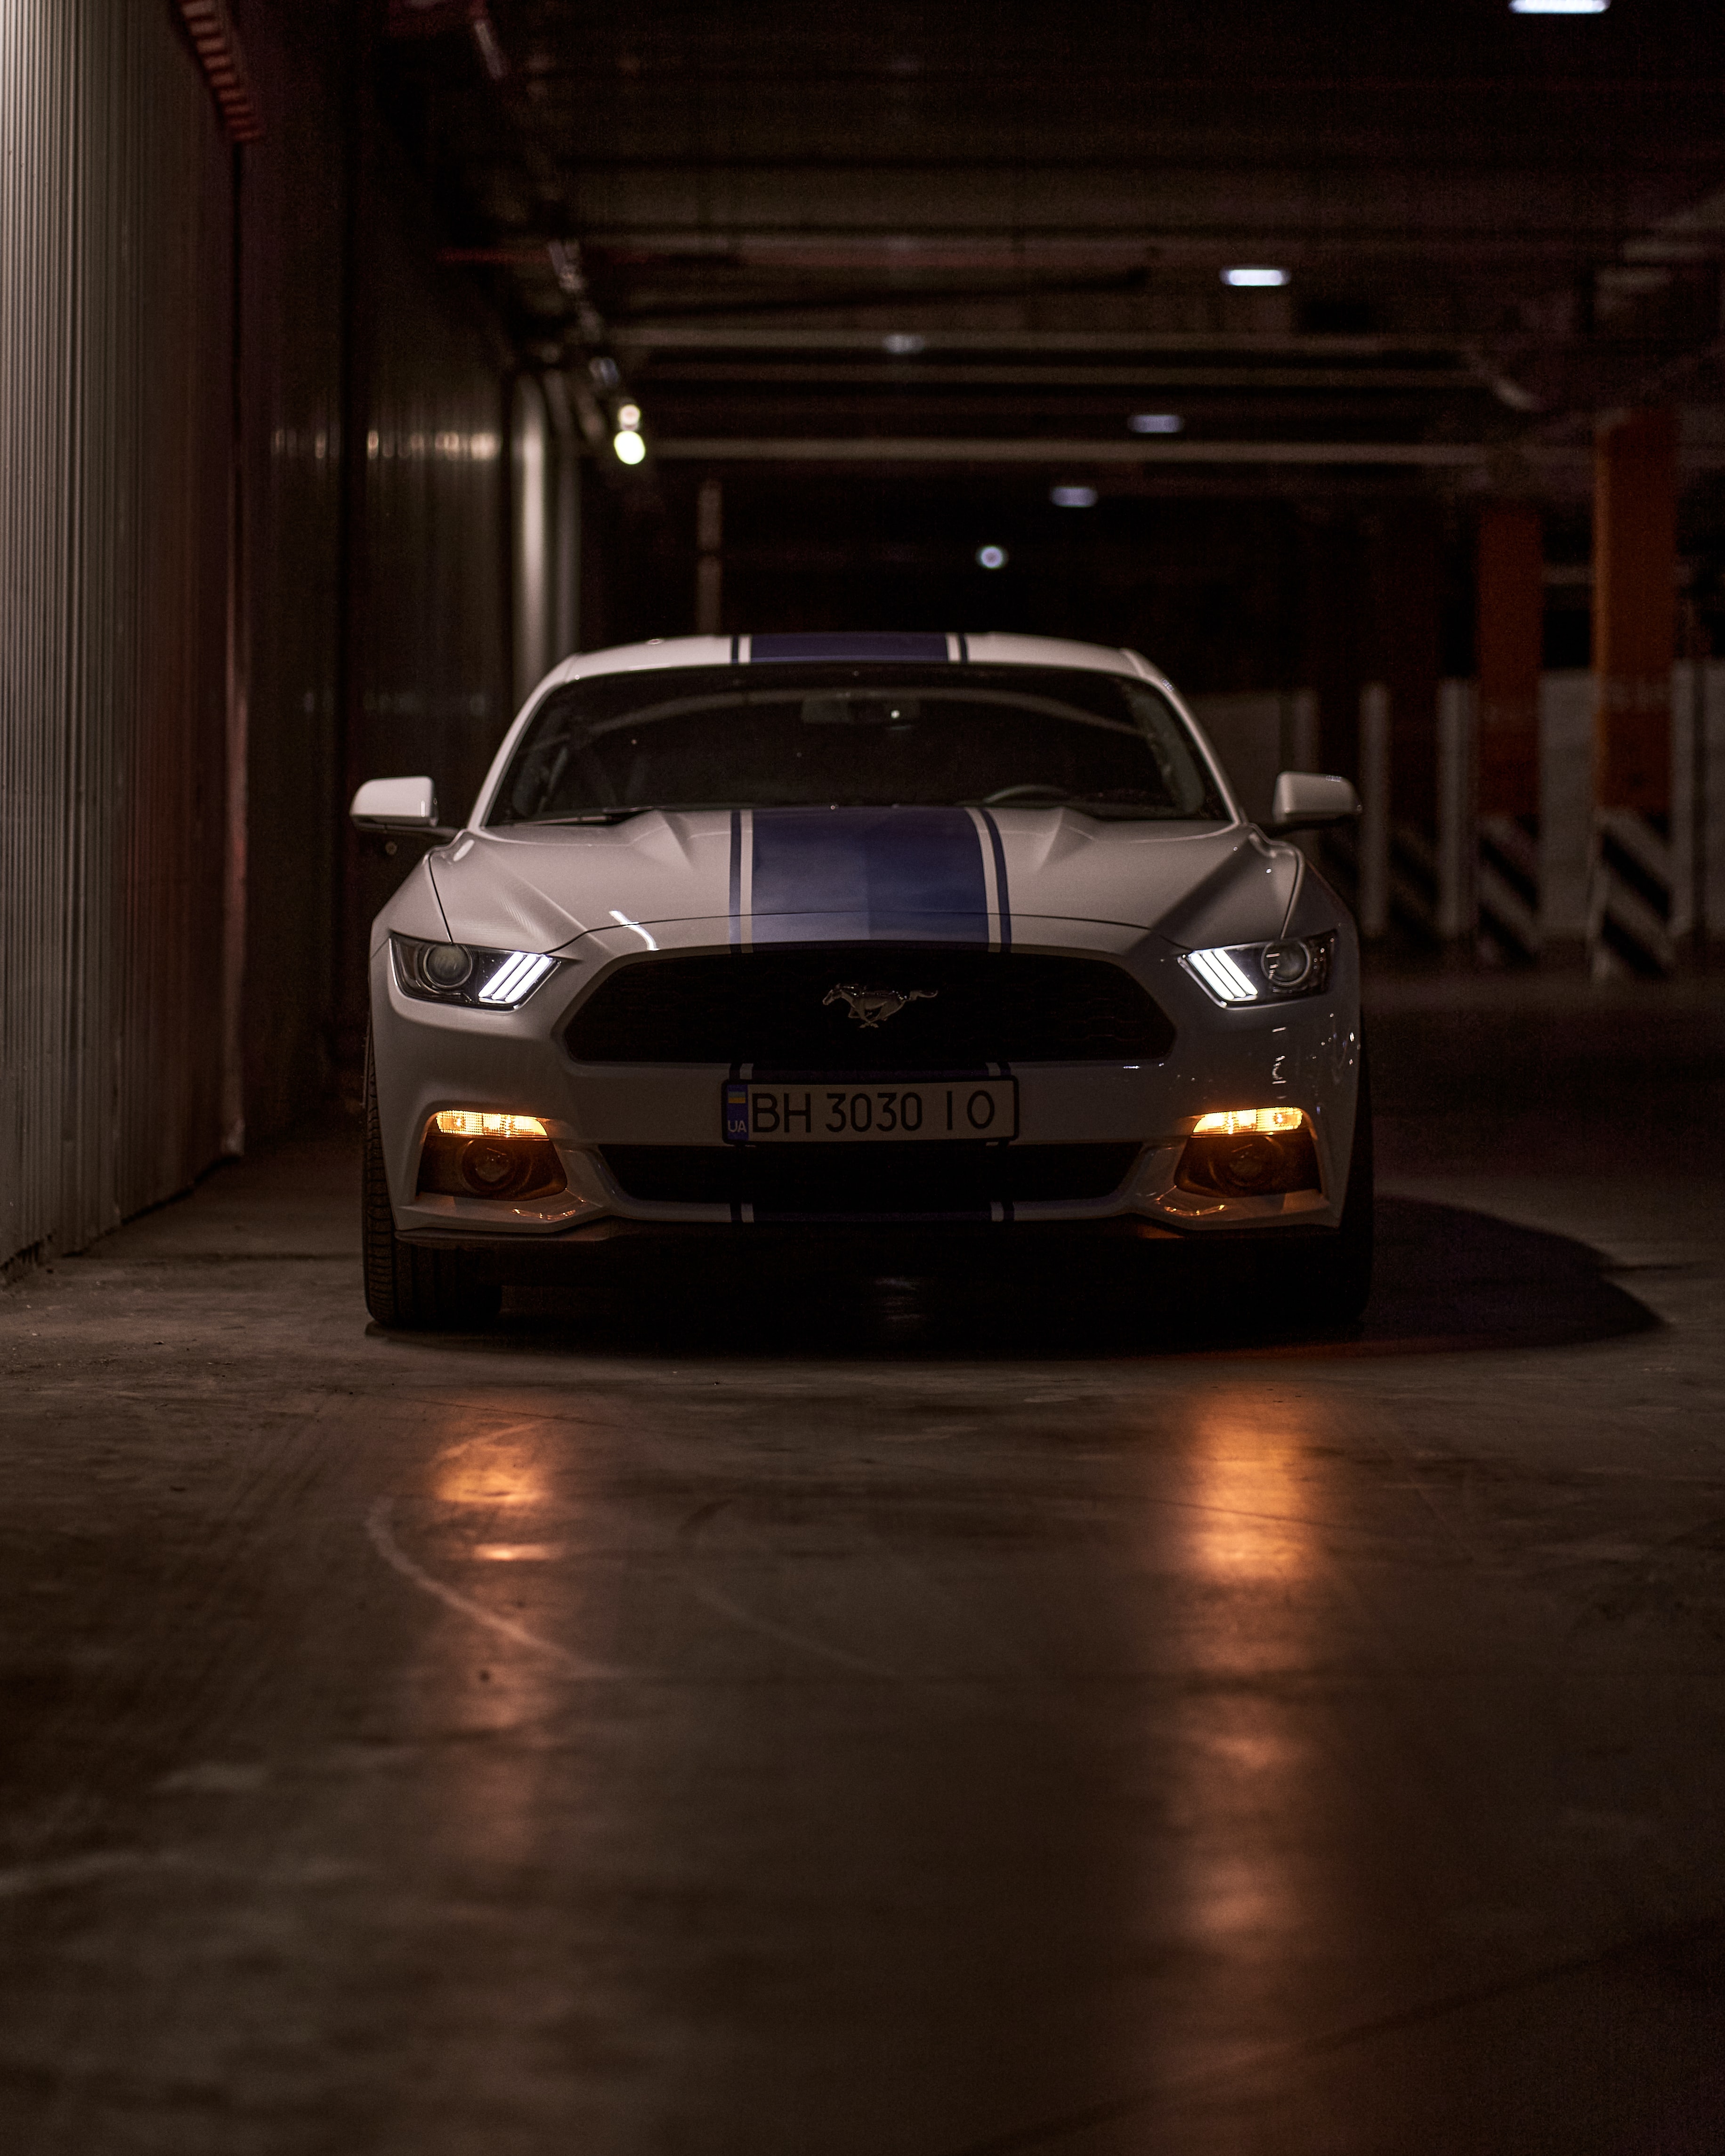 mustang, car, cars, sports car, front view, mustang gt, lights, headlights, sports